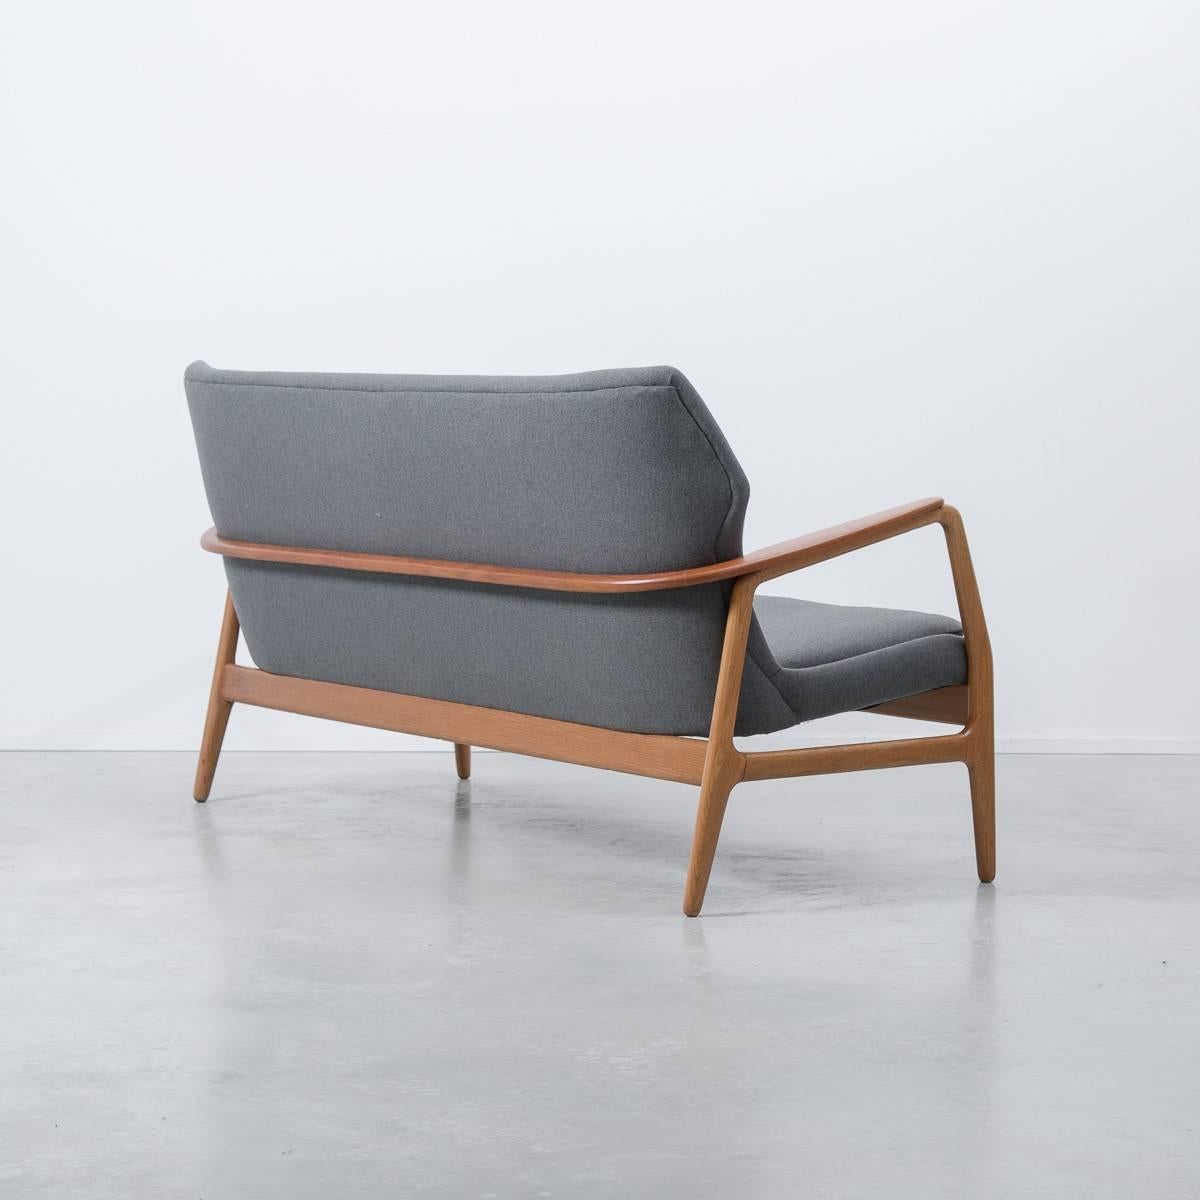 Danish cabinetmaker Aksel Bender Madsen learnt his trade at the Furniture School at the Royal Danish Academy of Fine Arts, graduating in 1940. Thereafter he worked with the famous architects Kaare Klint and Arne Jacobsen until 1943. 

This